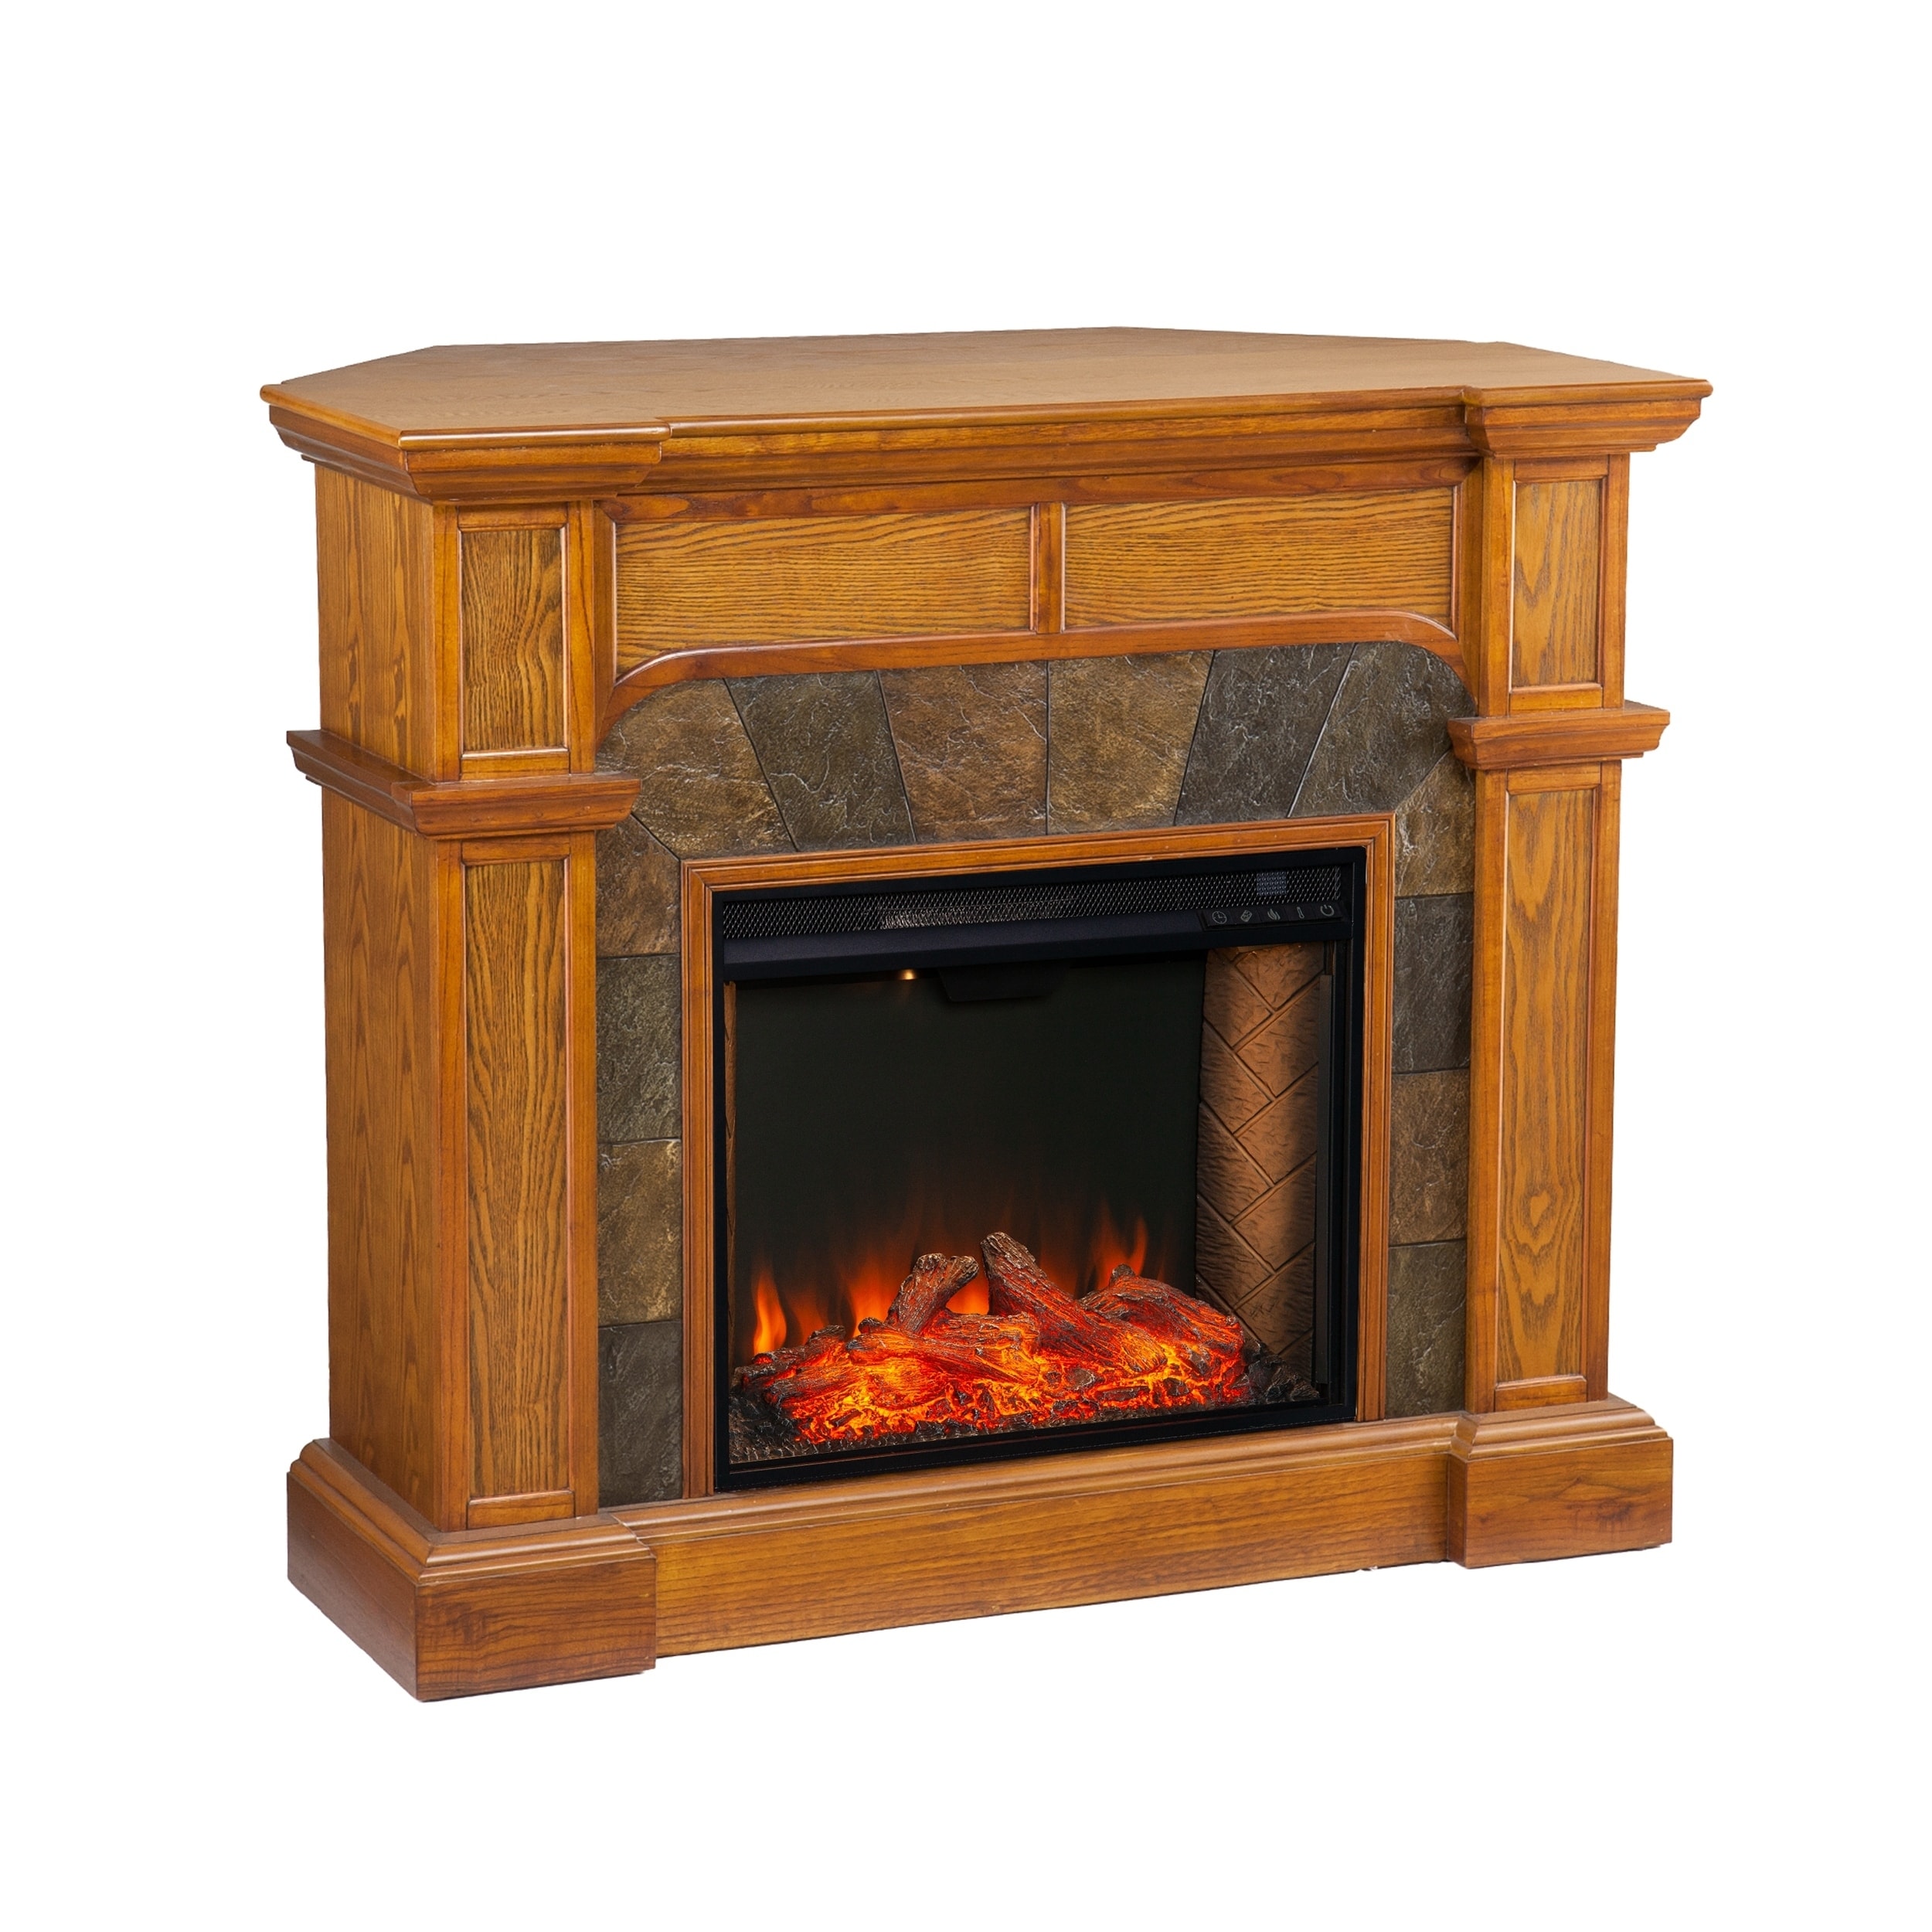 SEI Furniture Cabato Transitional Brown Alexa Enabled Fireplace with Faux  Stone On Sale Bed Bath  Beyond 29715966